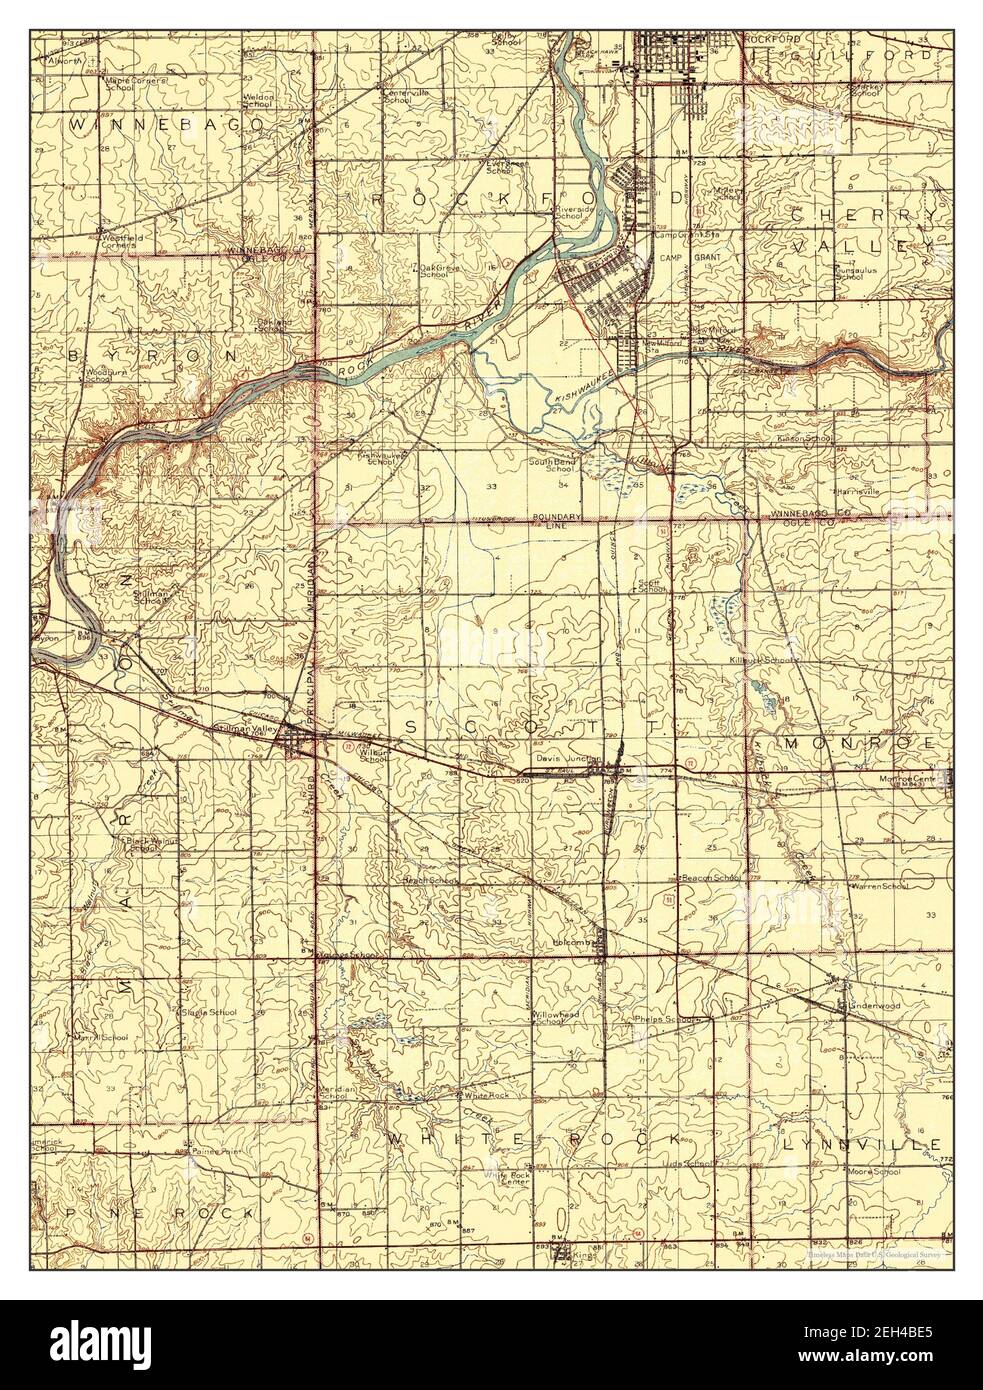 Kings, Illinois, map 1918, 1:62500, United States of America by Timeless Maps, data U.S. Geological Survey Stock Photo